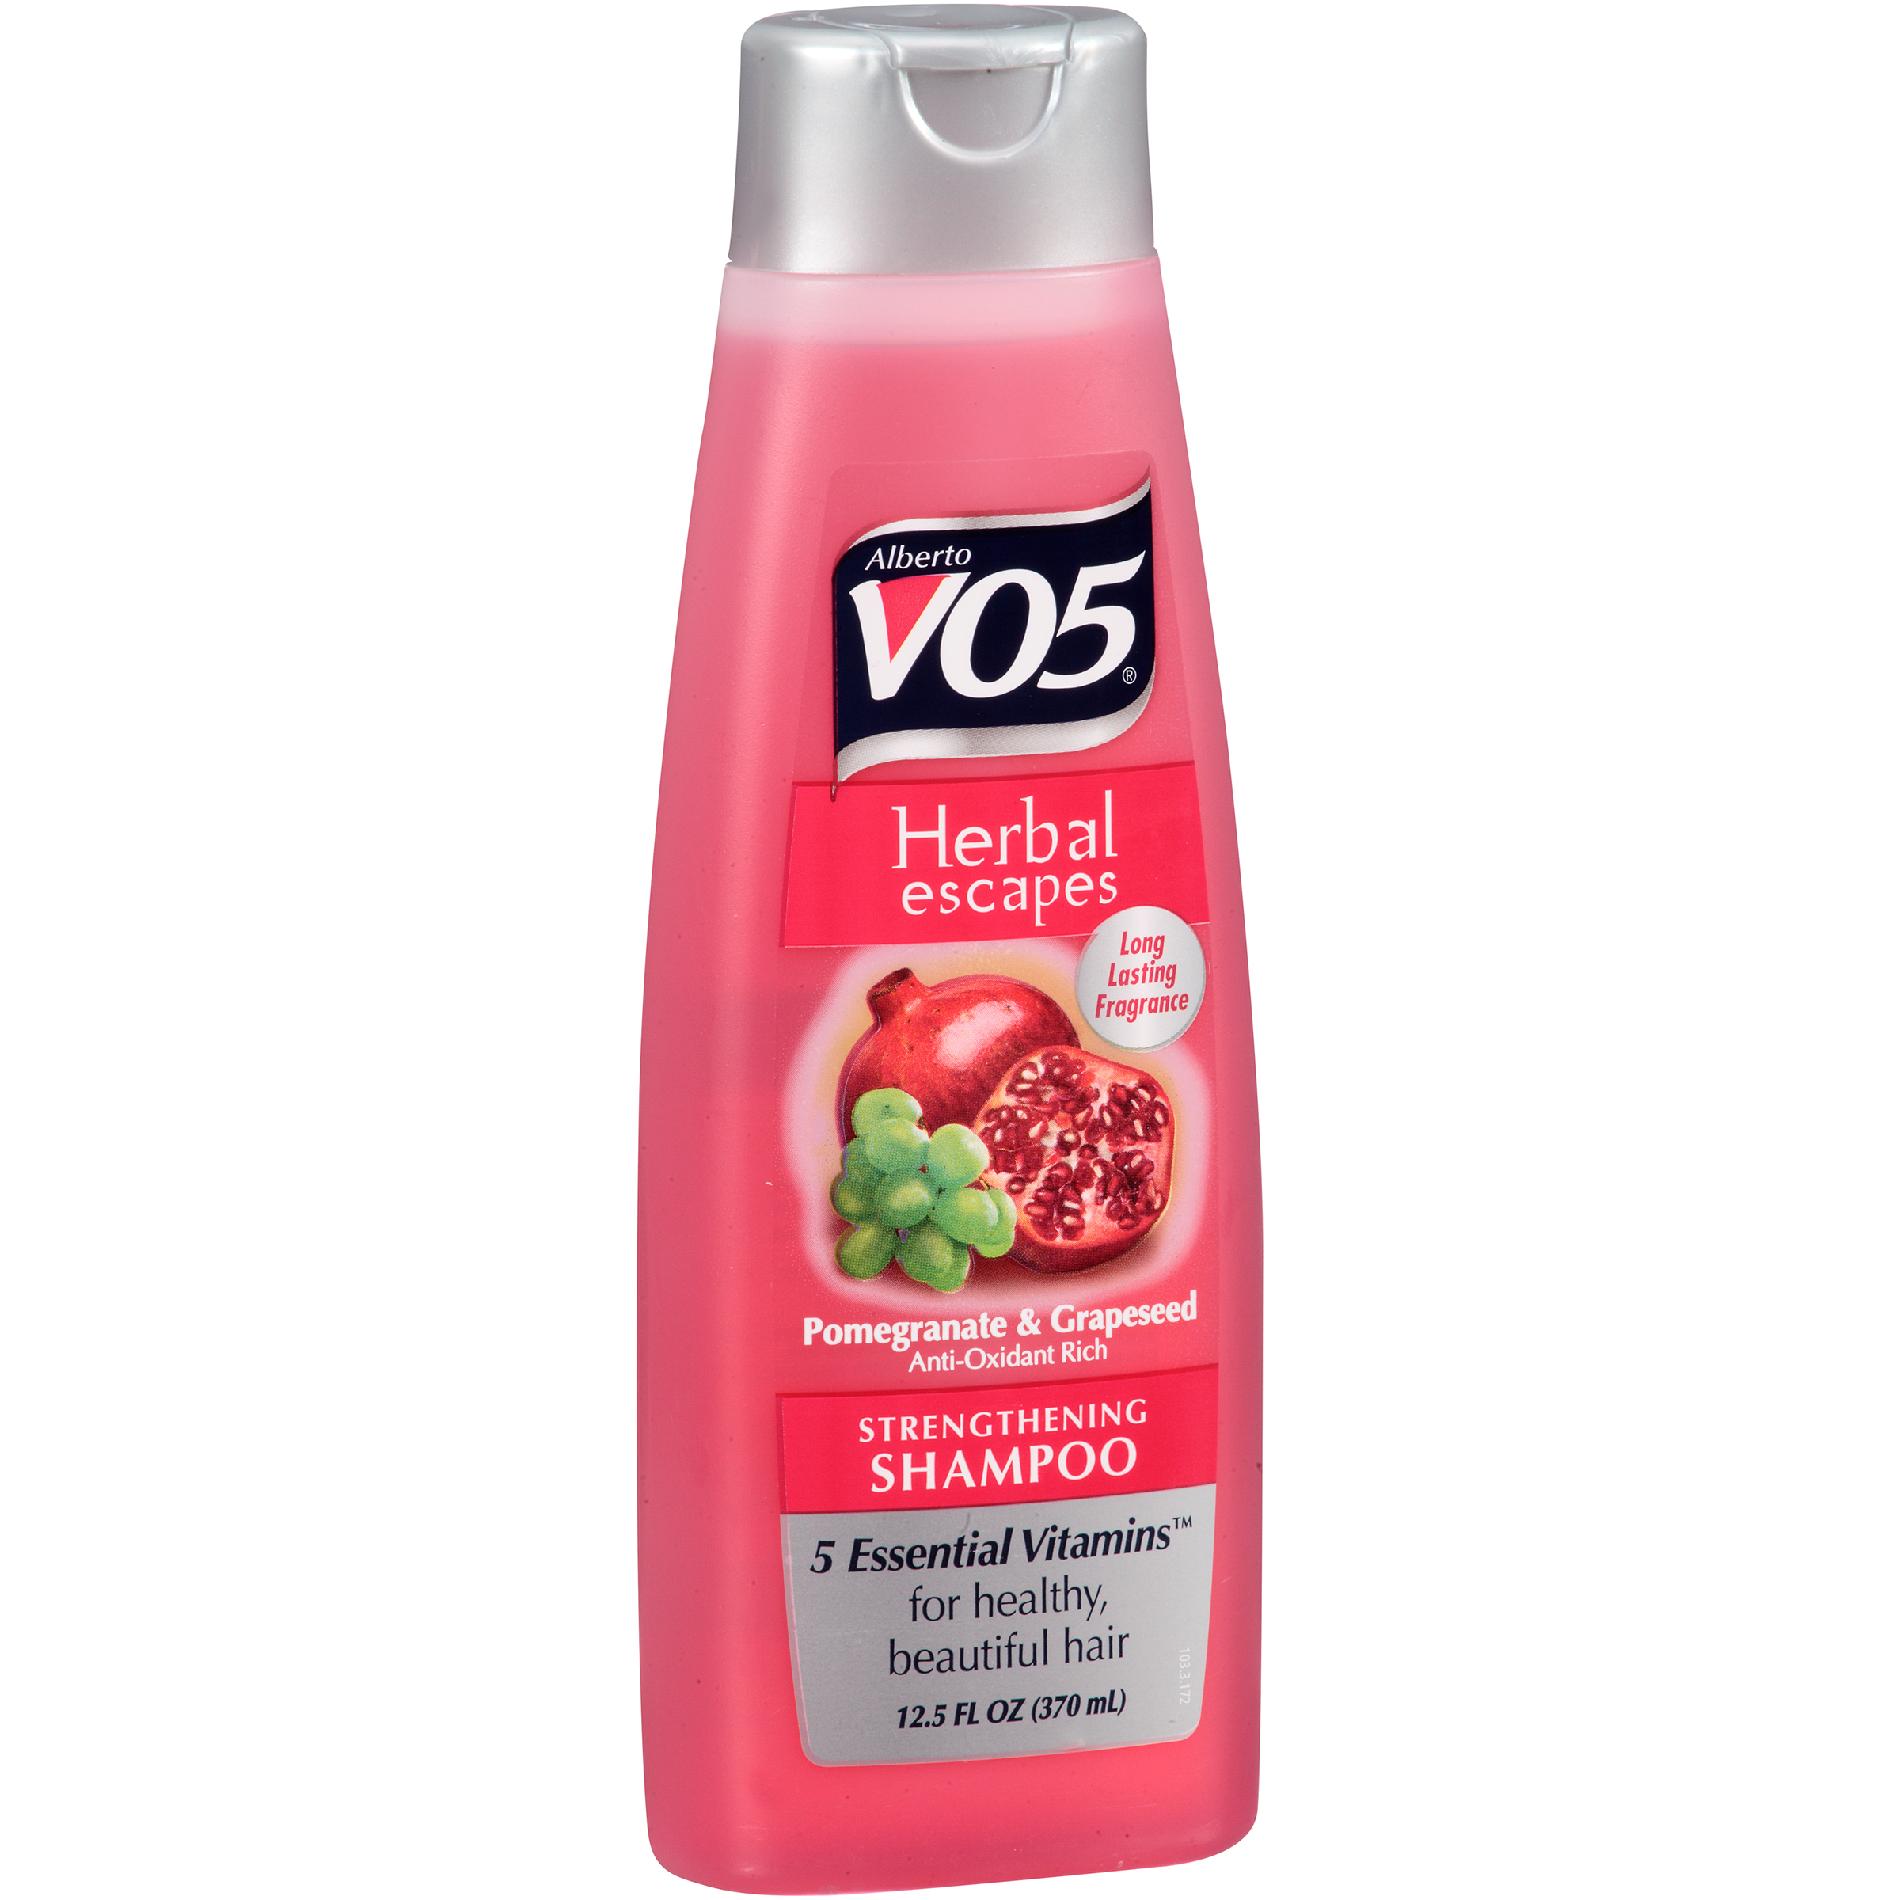 *HOT* 30¢ VO5, $1 Herbal Essences, and MORE + Free Pickup! (YMMV)